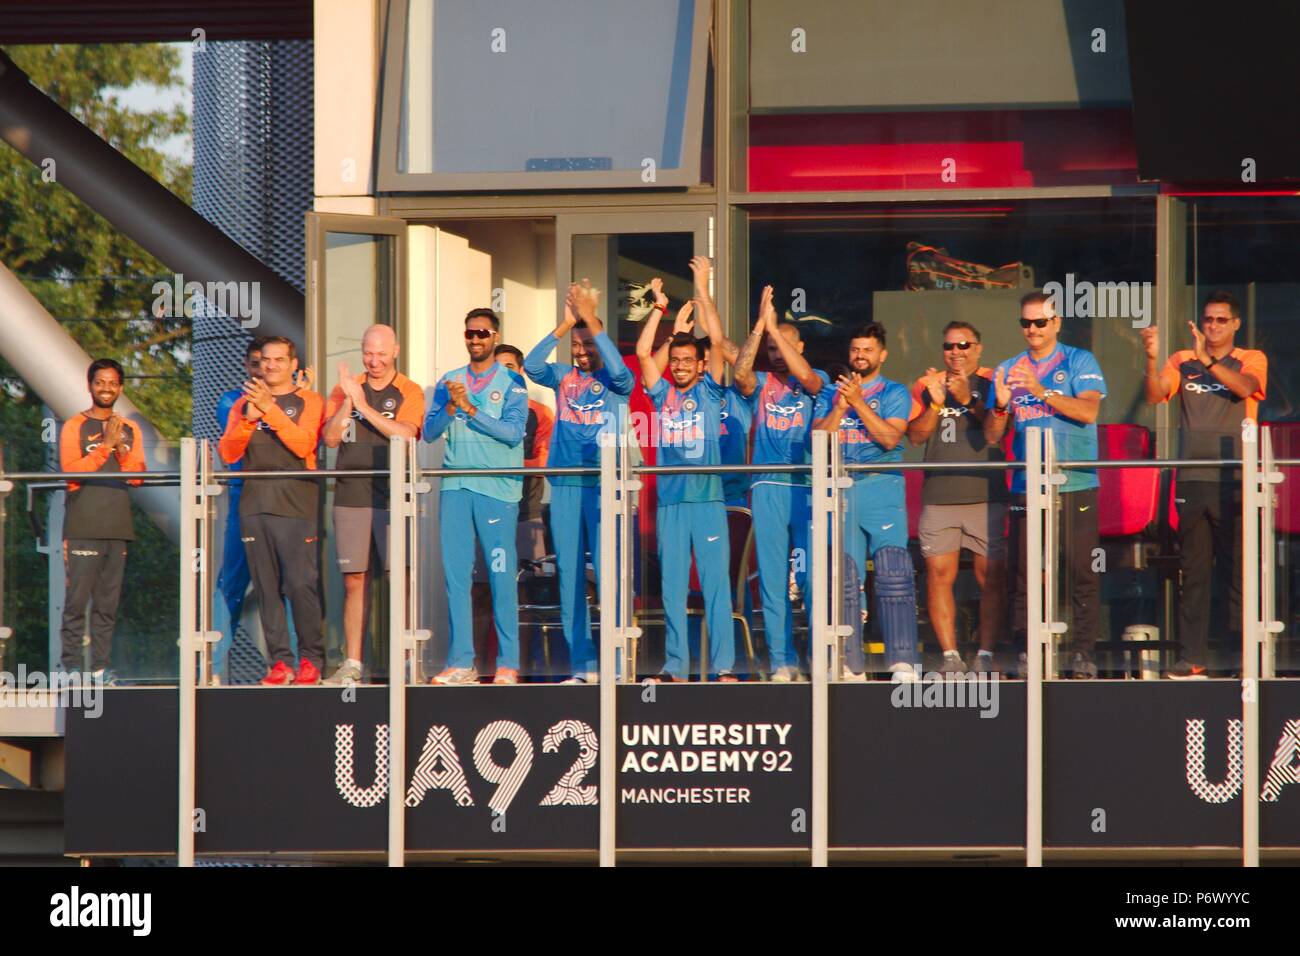 Manchester, England, 3 July 2018. The Indian team on the balcony celebrating when Lokesh Rahul reached his century against England in the first Vitality T20 International at Emirates Old Trafford. Credit: Colin Edwards/Alamy Live News. Stock Photo